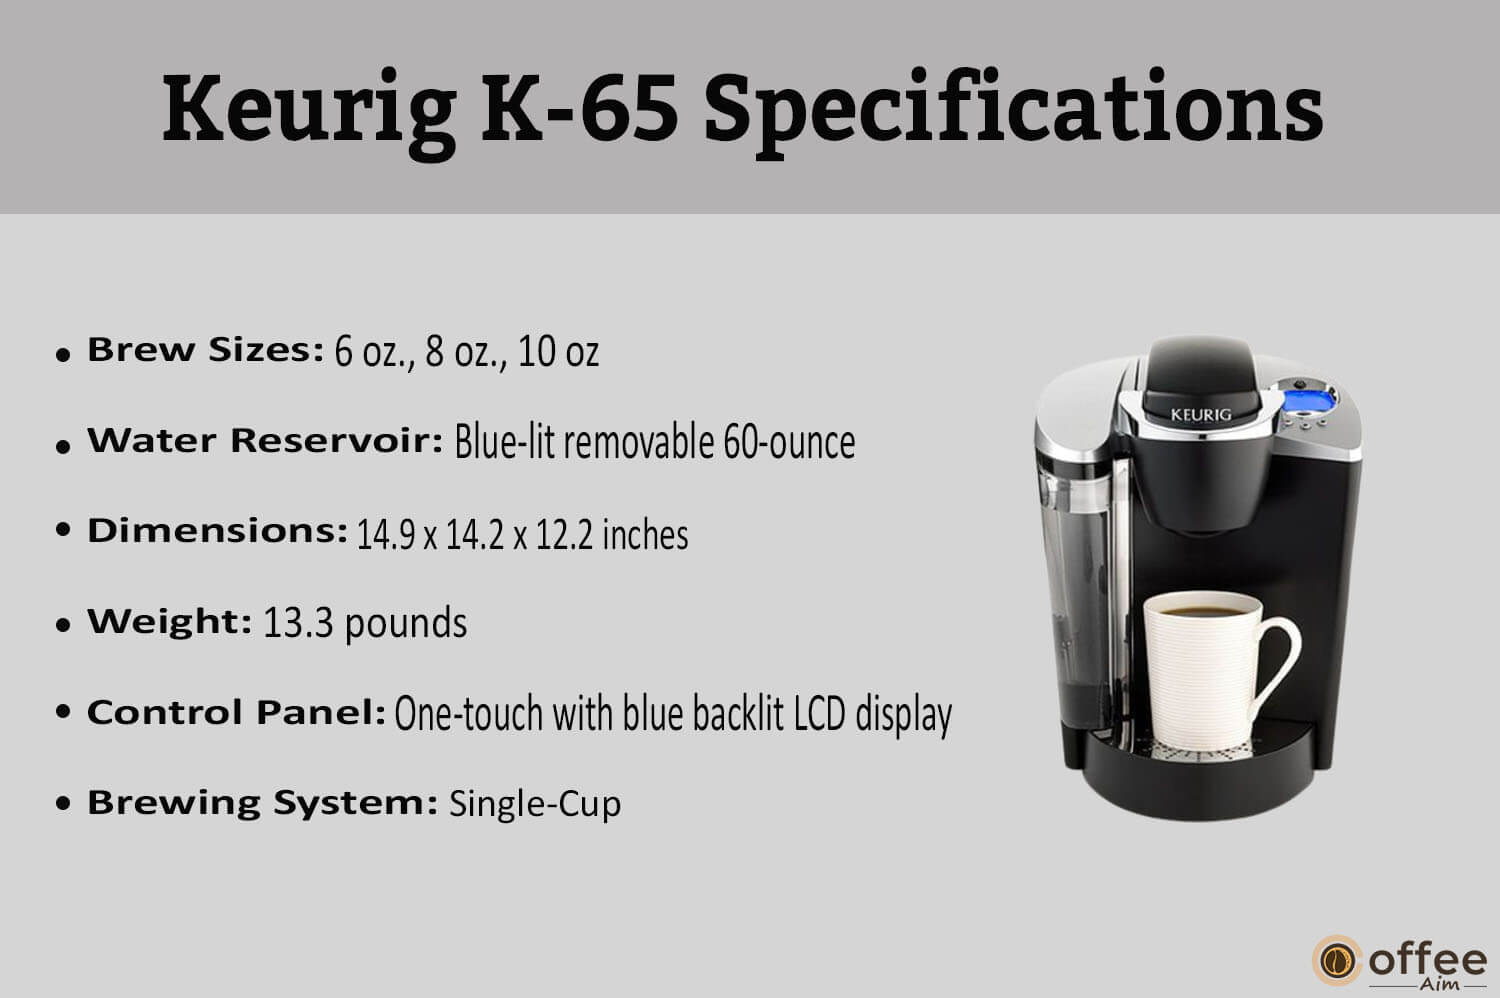 "The image meticulously outlines the specifications of the Keurig K-65 machine, enhancing our comprehensive Keurig K-65 review article for readers seeking technical details."